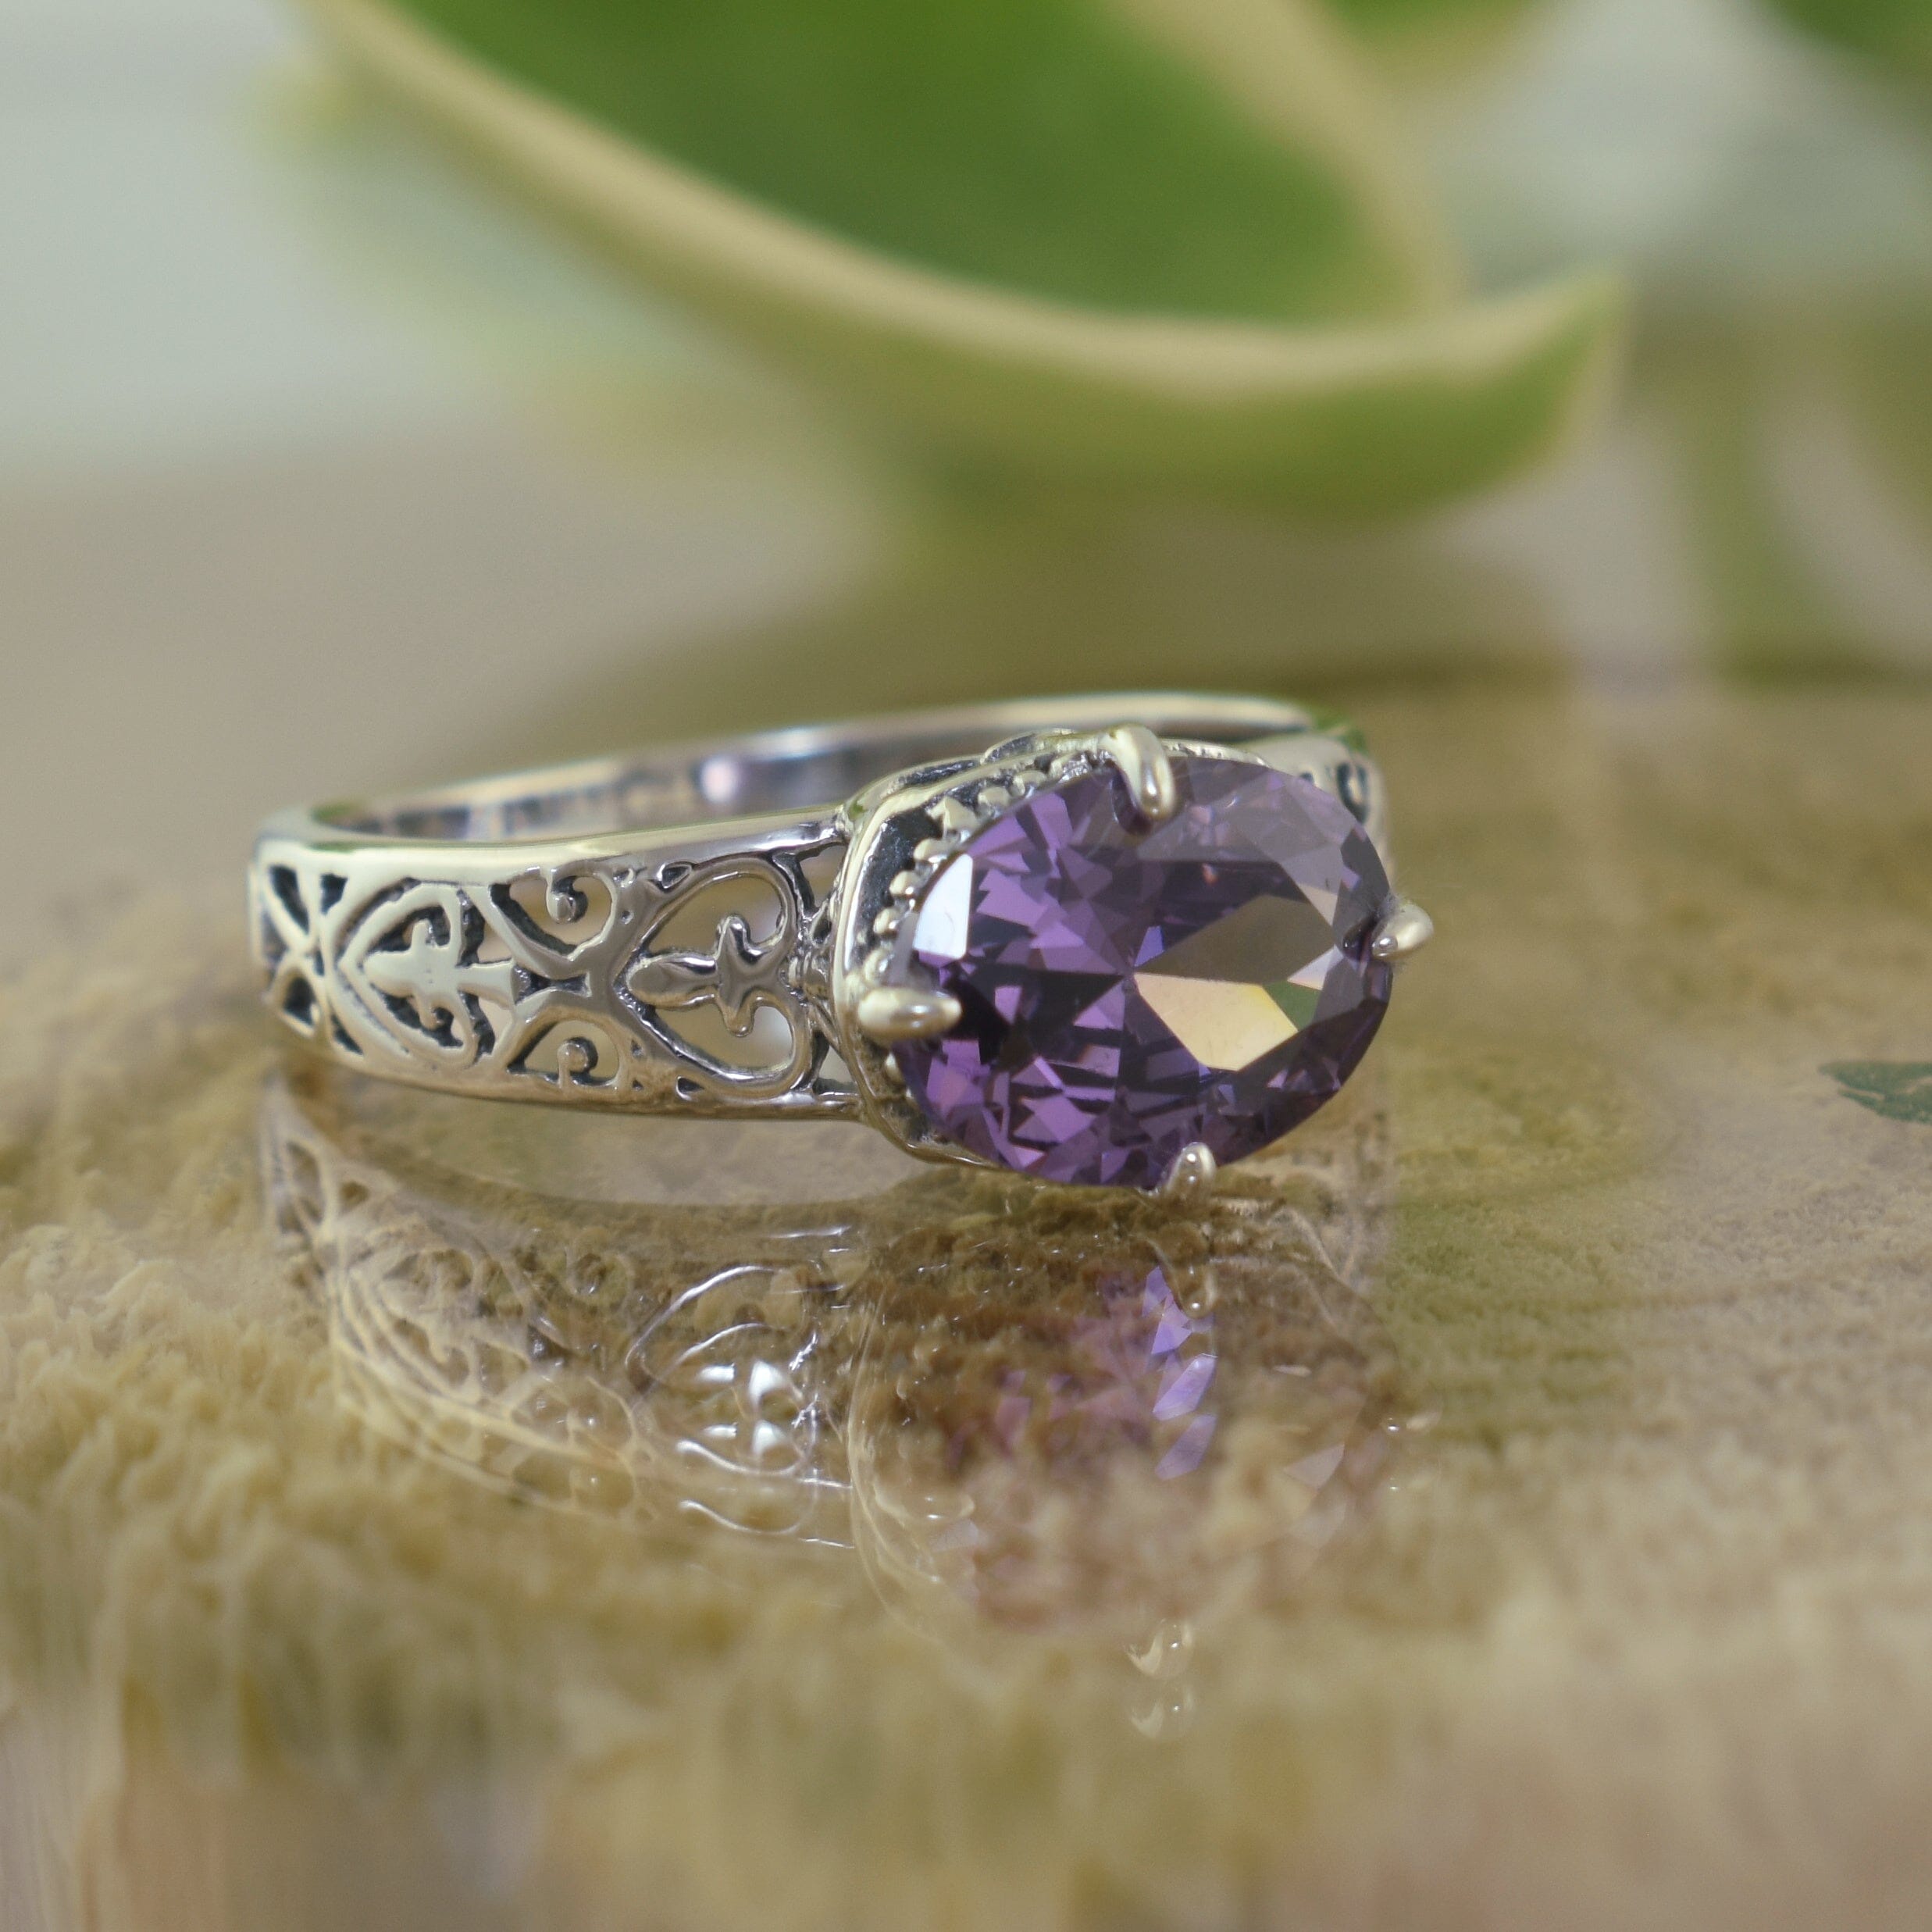 .925 antique sterling silver ring with oval shaped amethyst cz stone